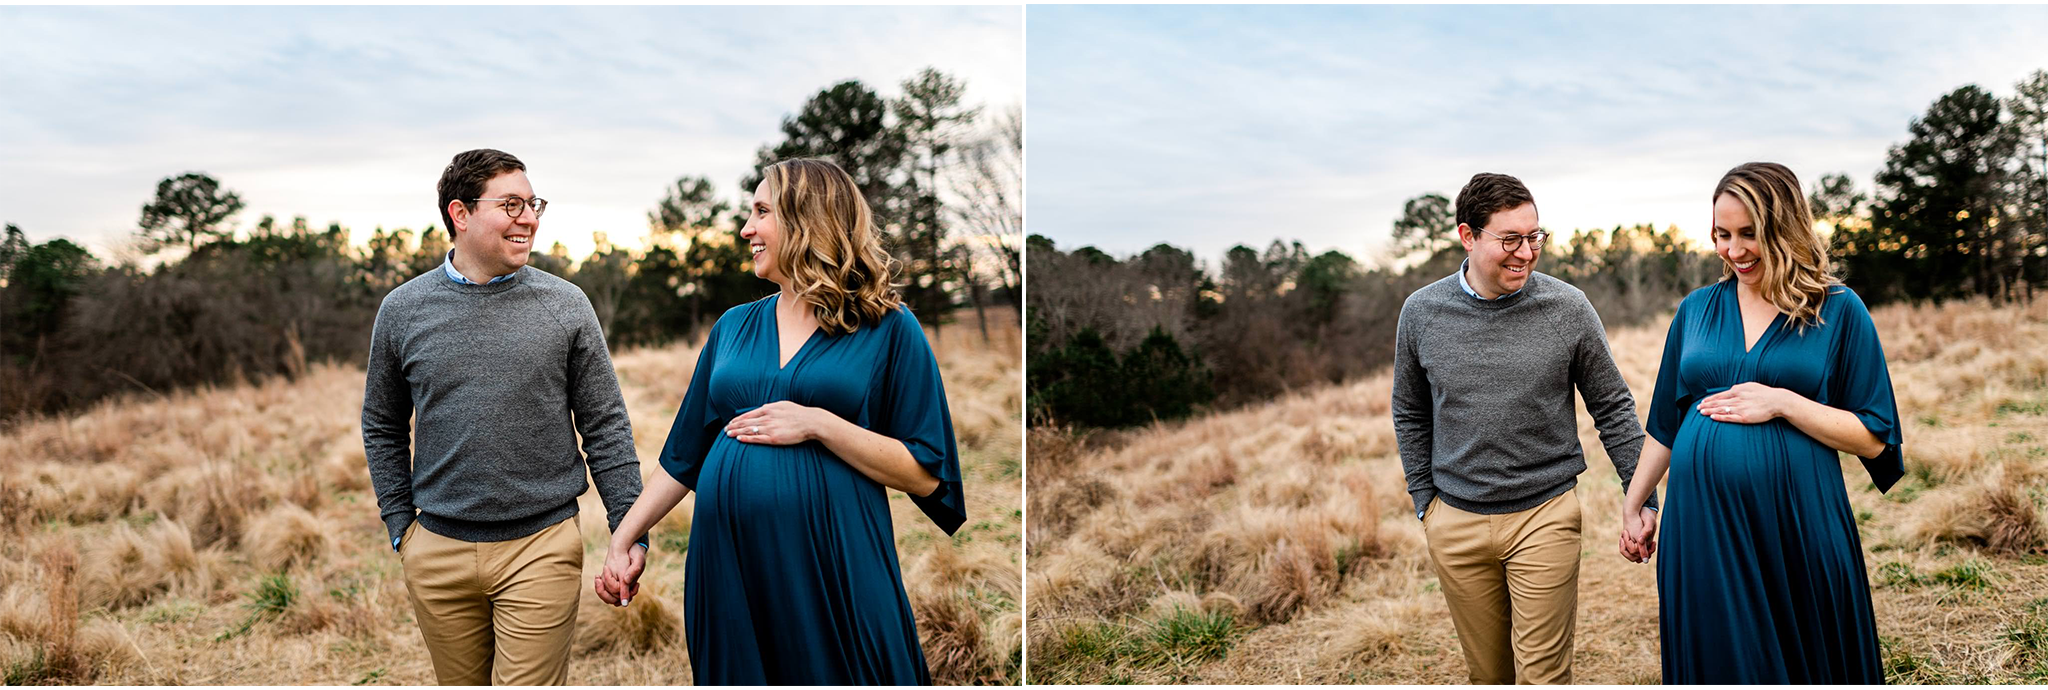 Raleigh Newborn Photographer | By G. Lin Photography | Man and woman holding hands and walking in open field at NCMA